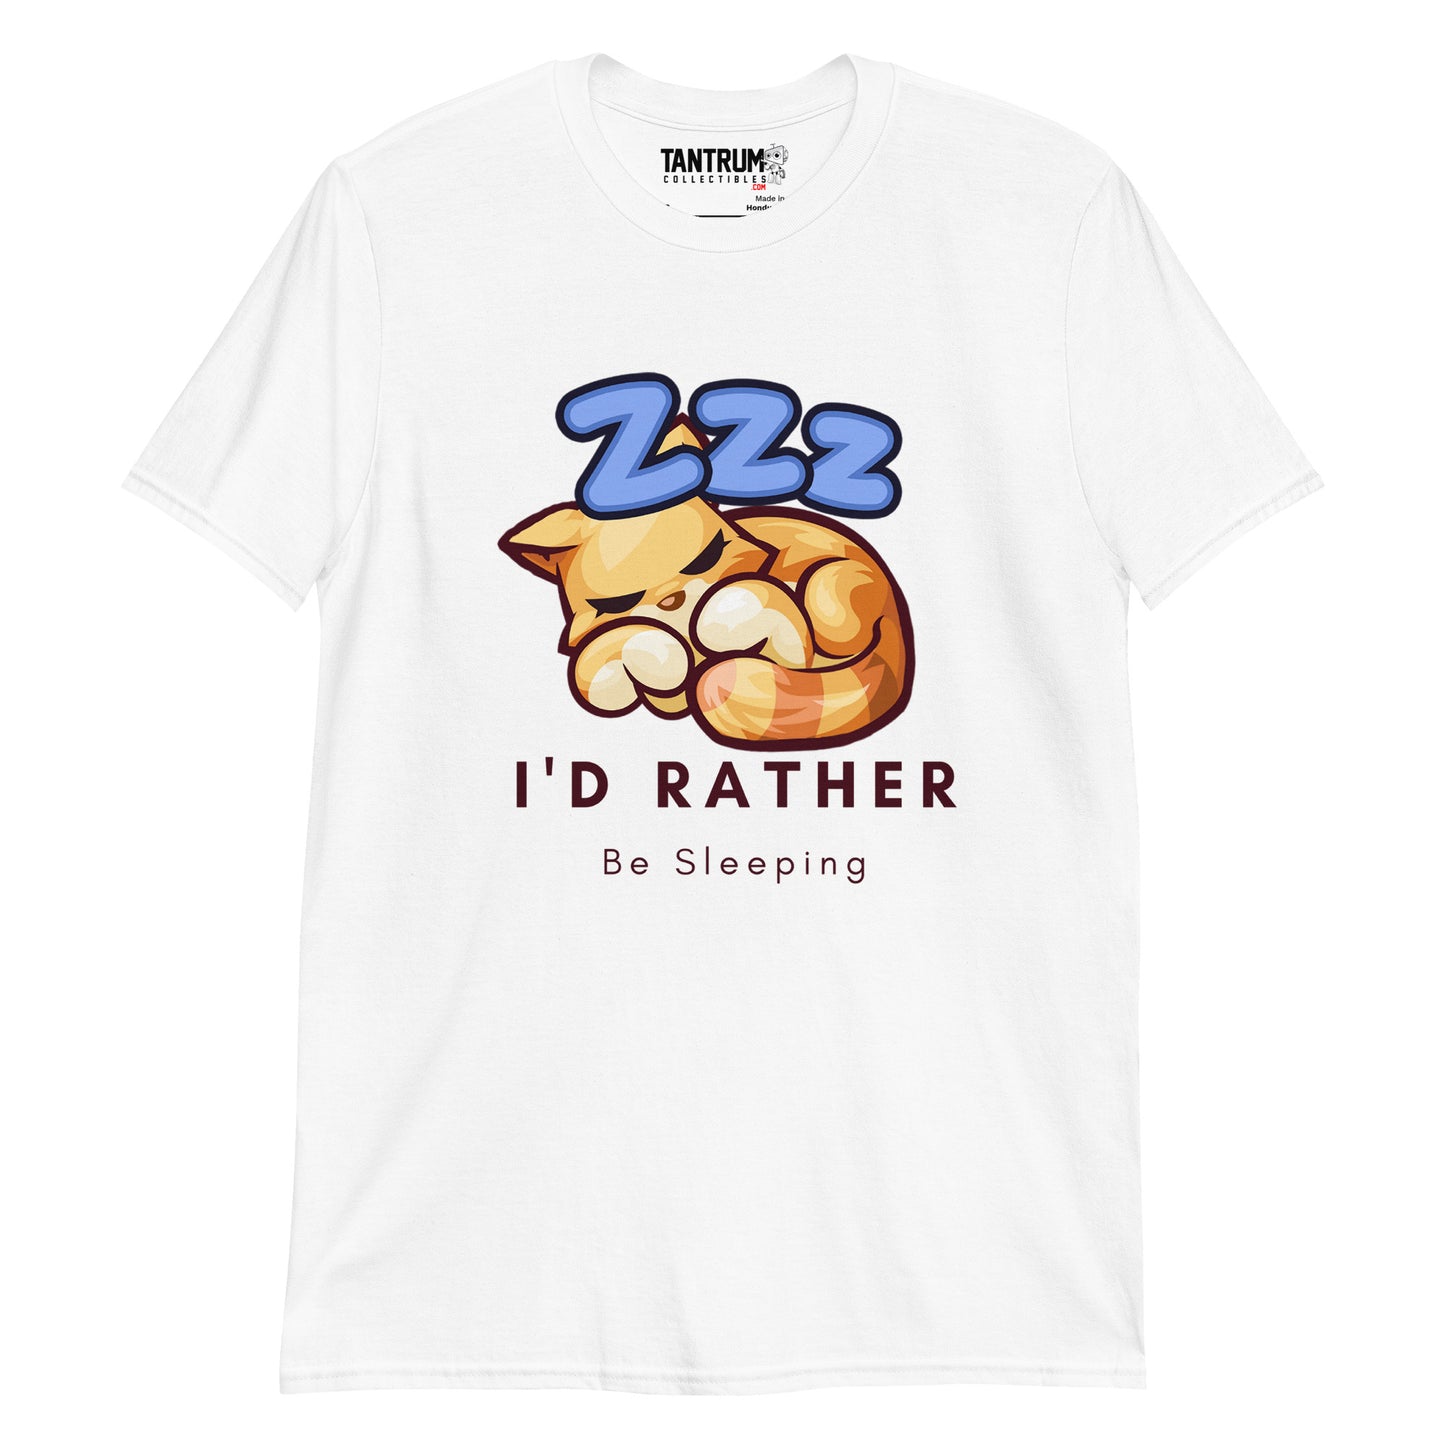 Dangers - Unisex T-Shirt - Id Rather Be Sleeping (Streamer Purchase)